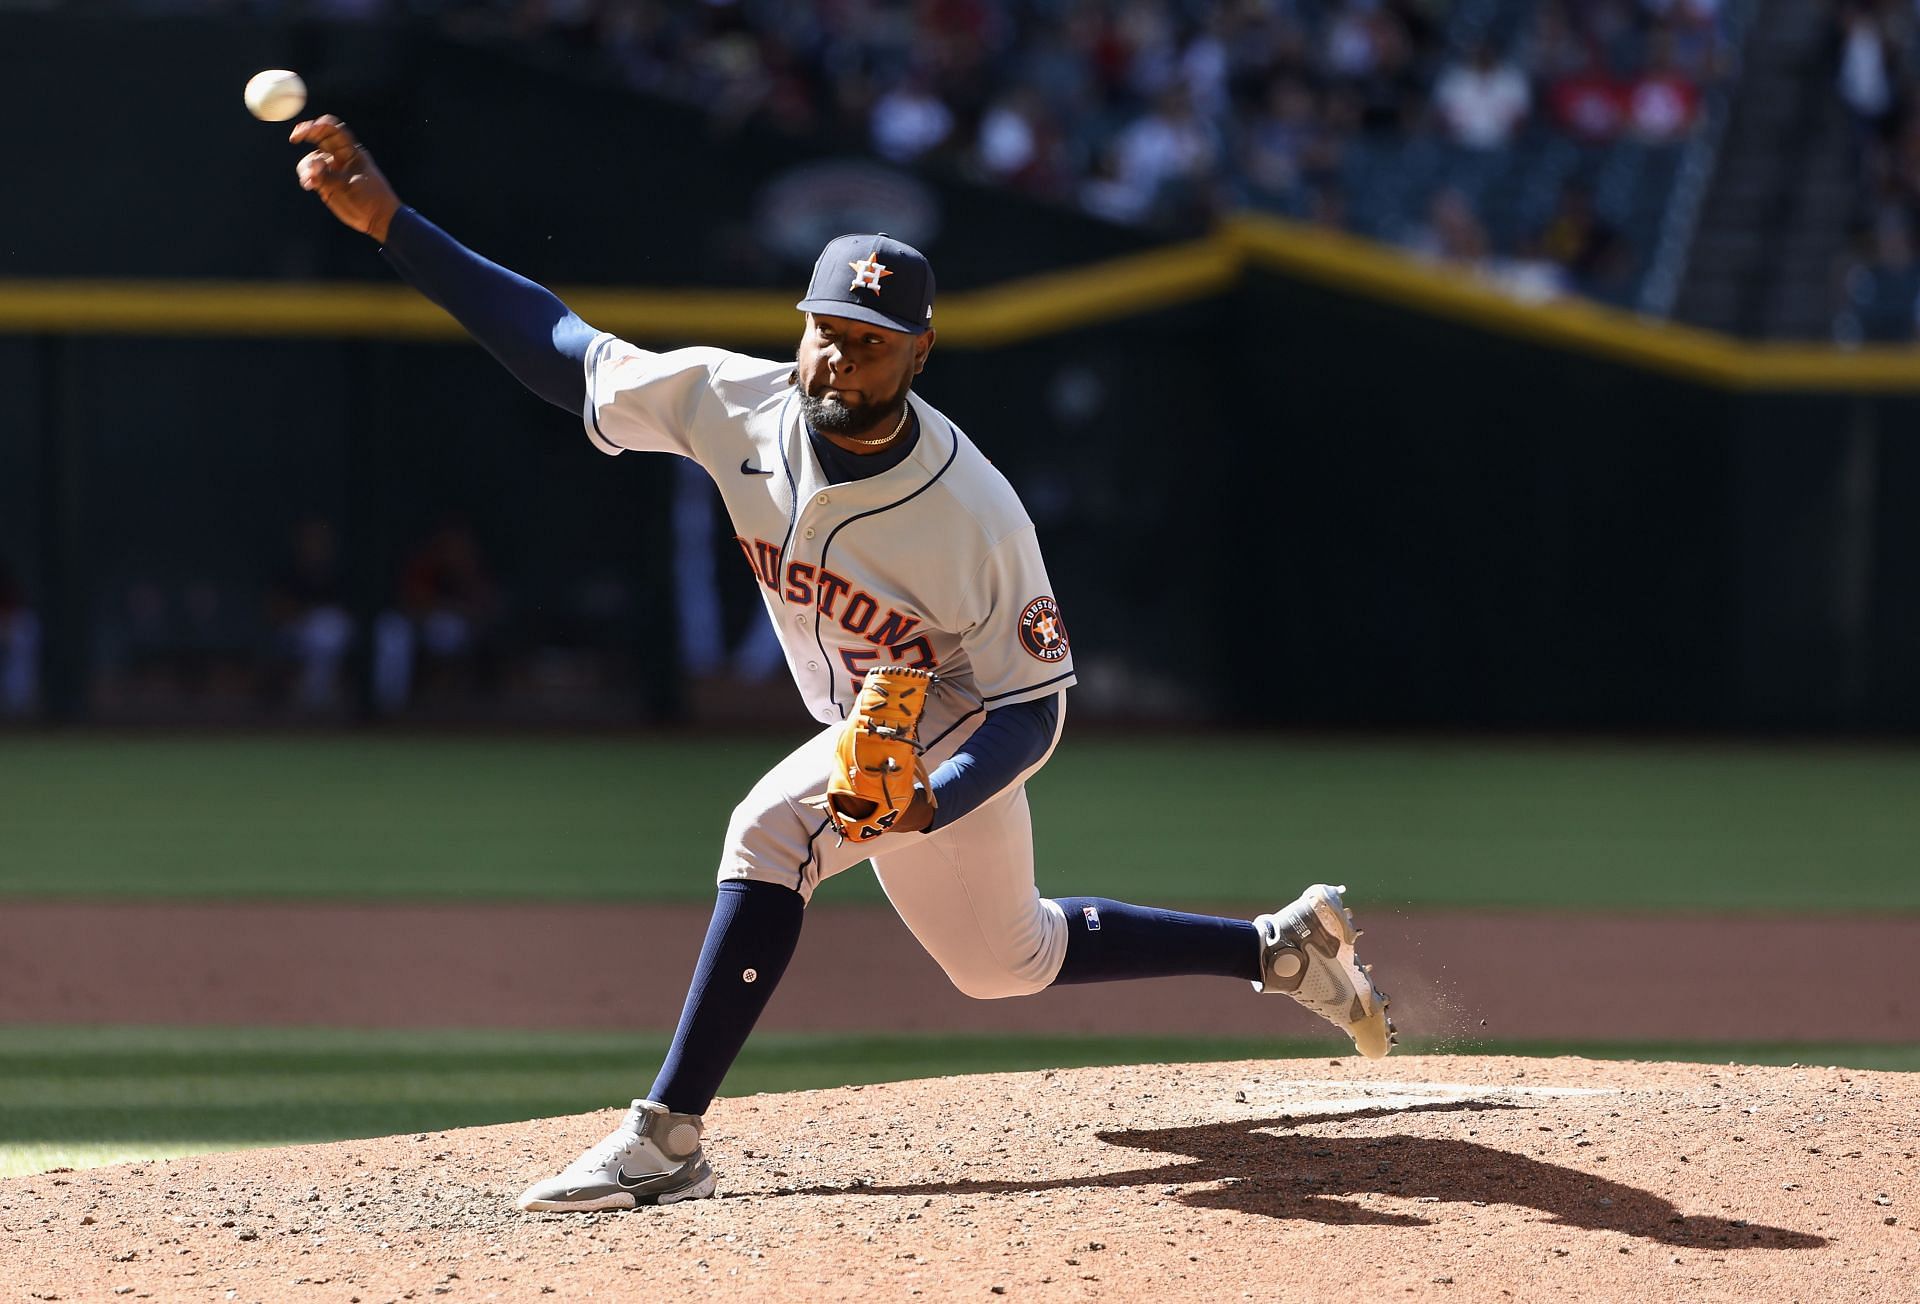 Three Astros Pitchers Combine to No-Hit the Yankees - The New York